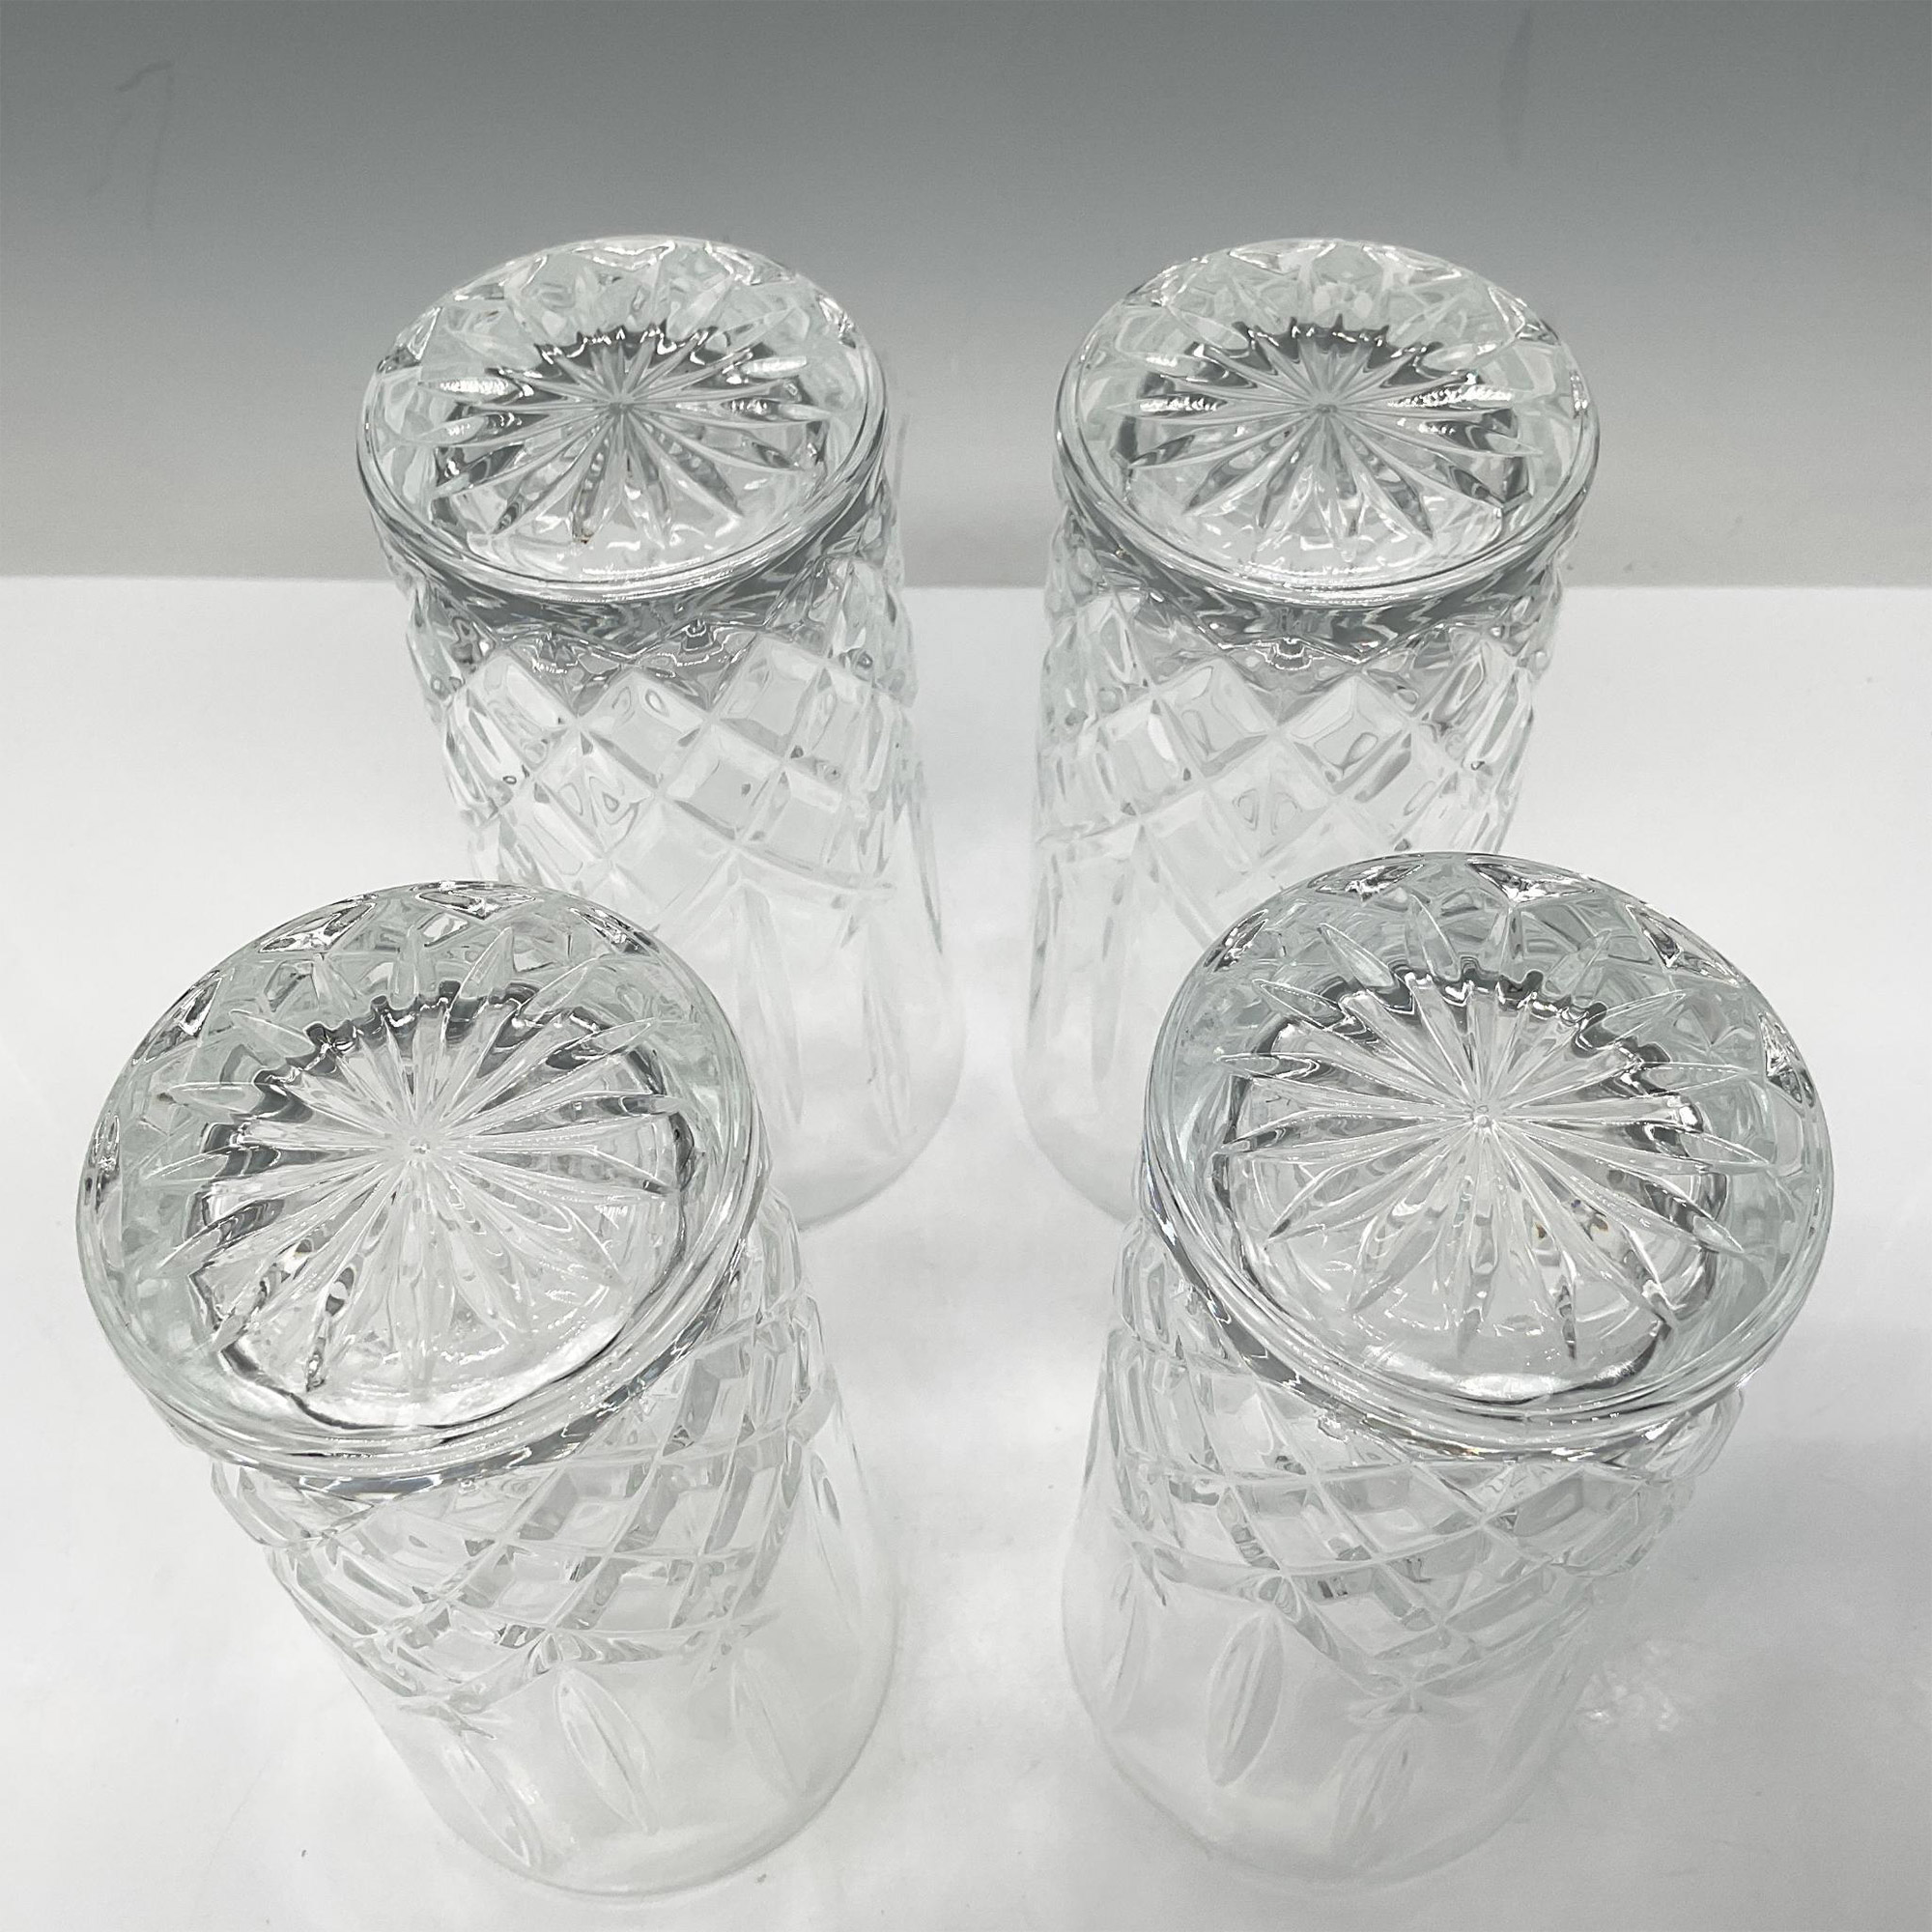 4pc Waterford Crystal Highball Glasses - Image 3 of 3